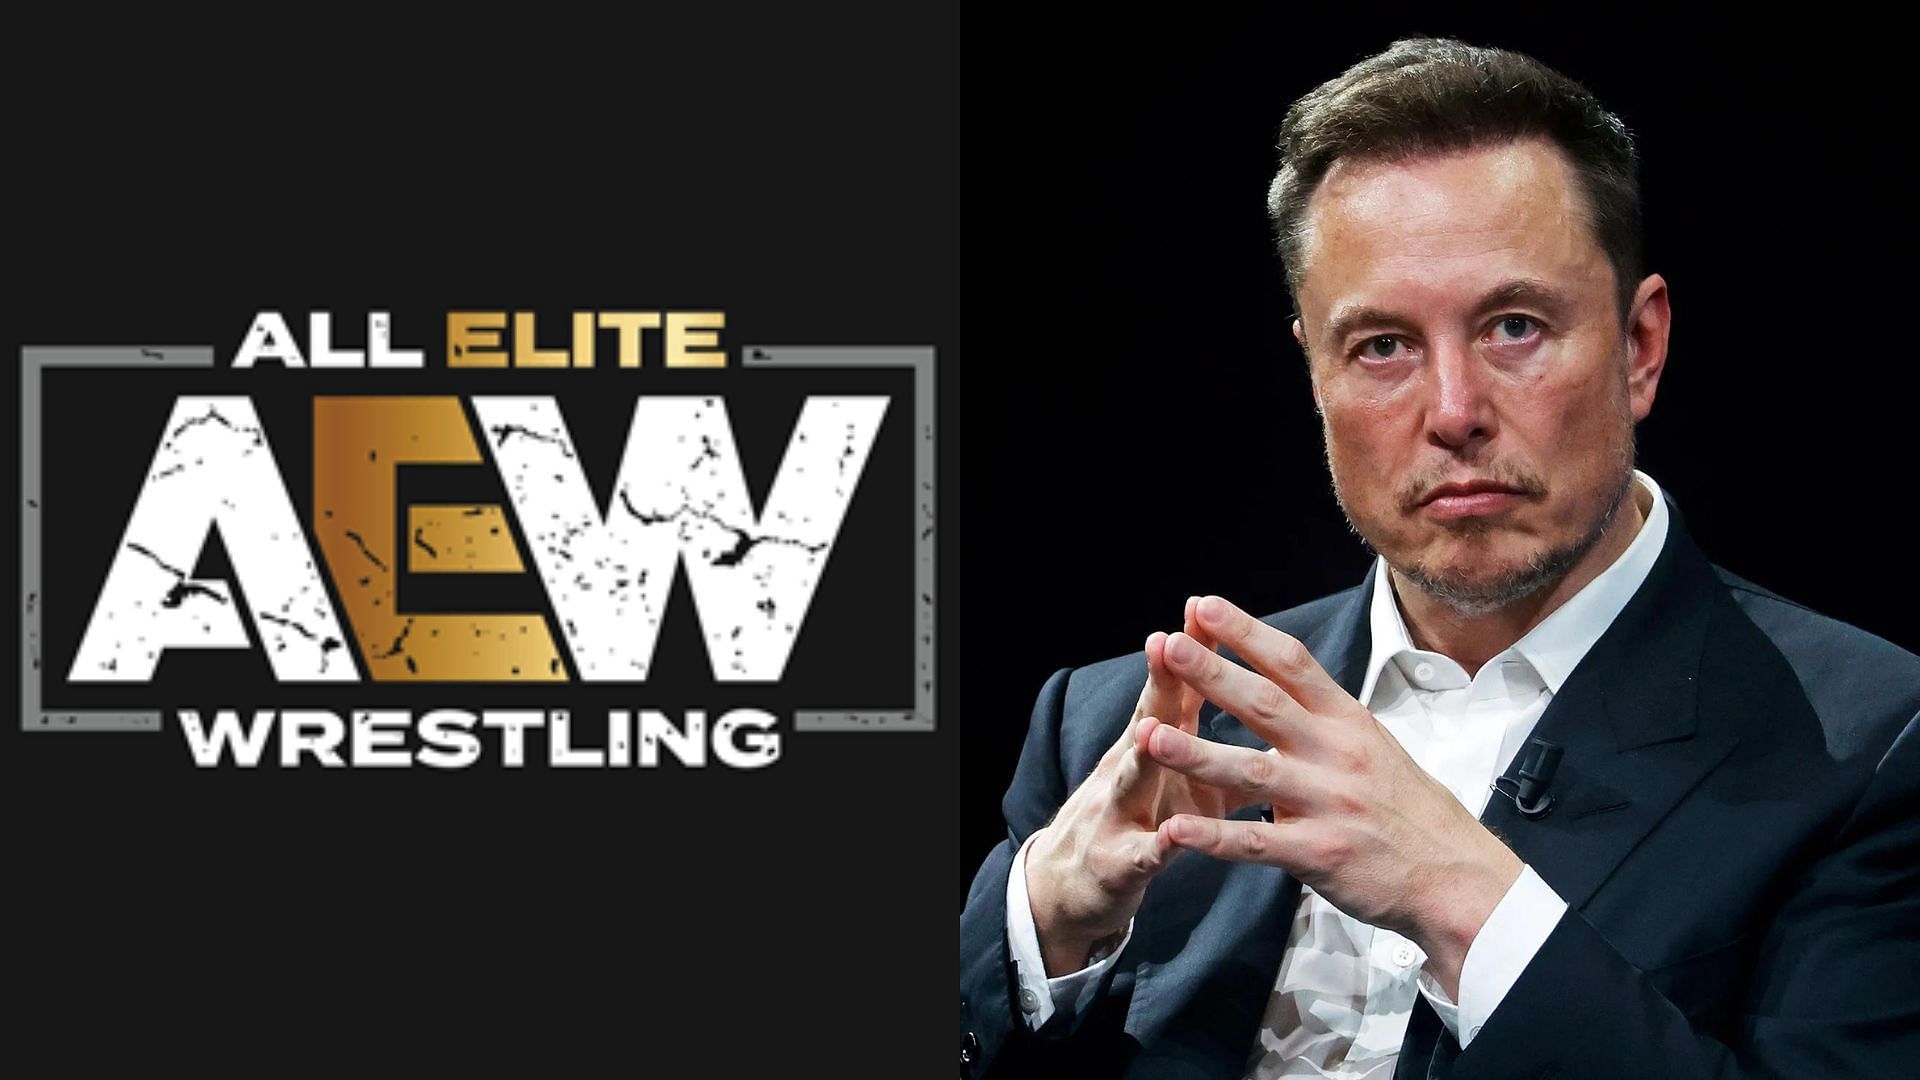 Find out which AEW star called out Elon Musk